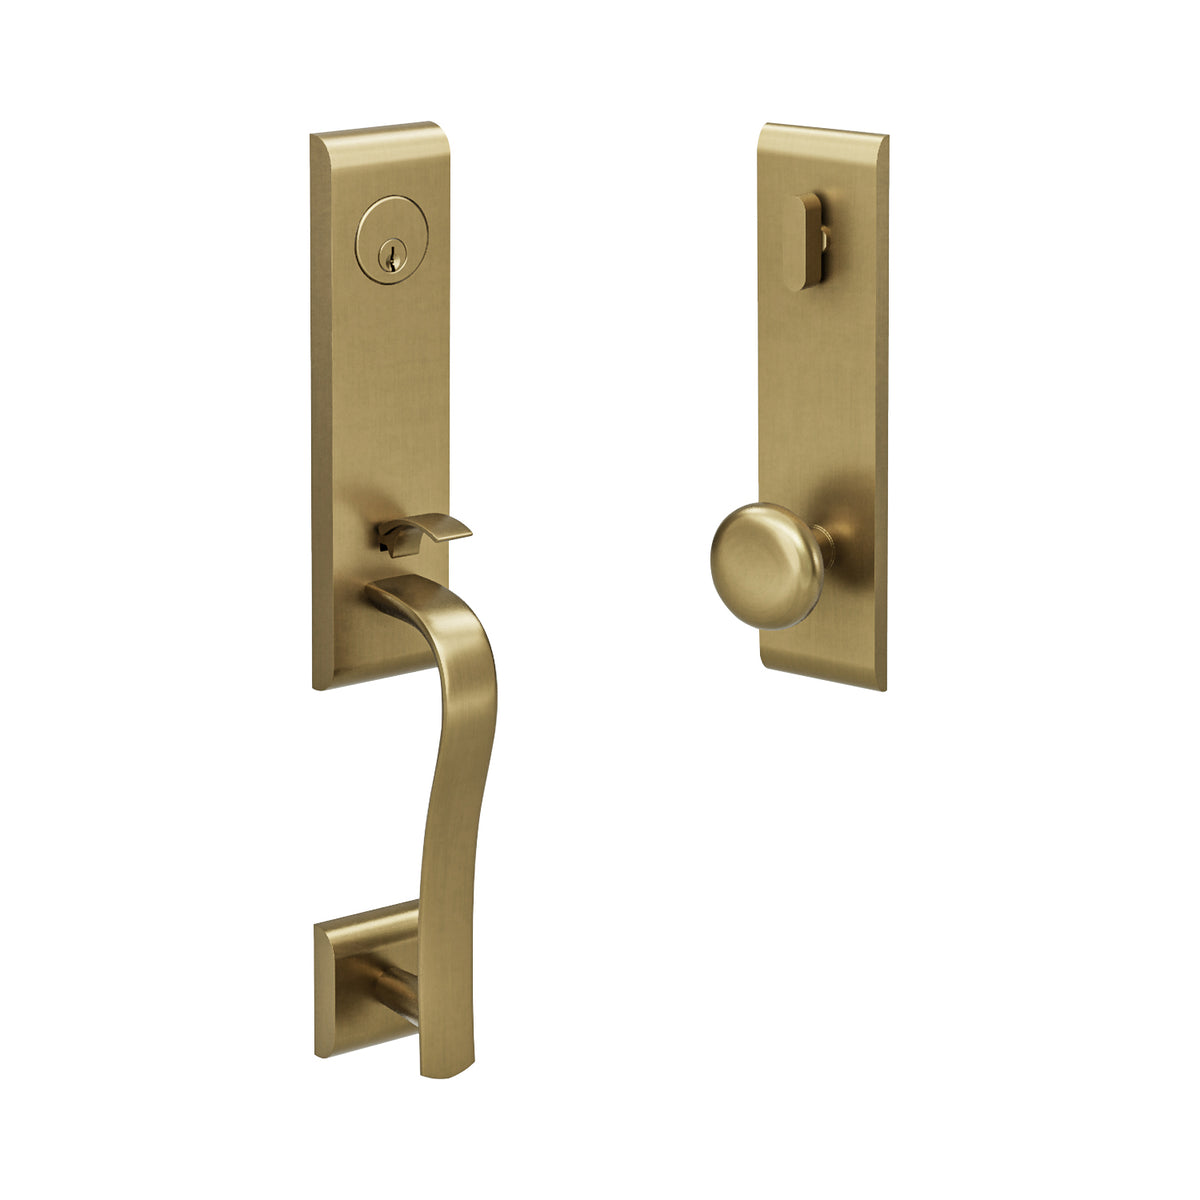 The Finest Decorative Handlsets, Levers, Knobs, and Deadbolts – Montana  Forge Hardware